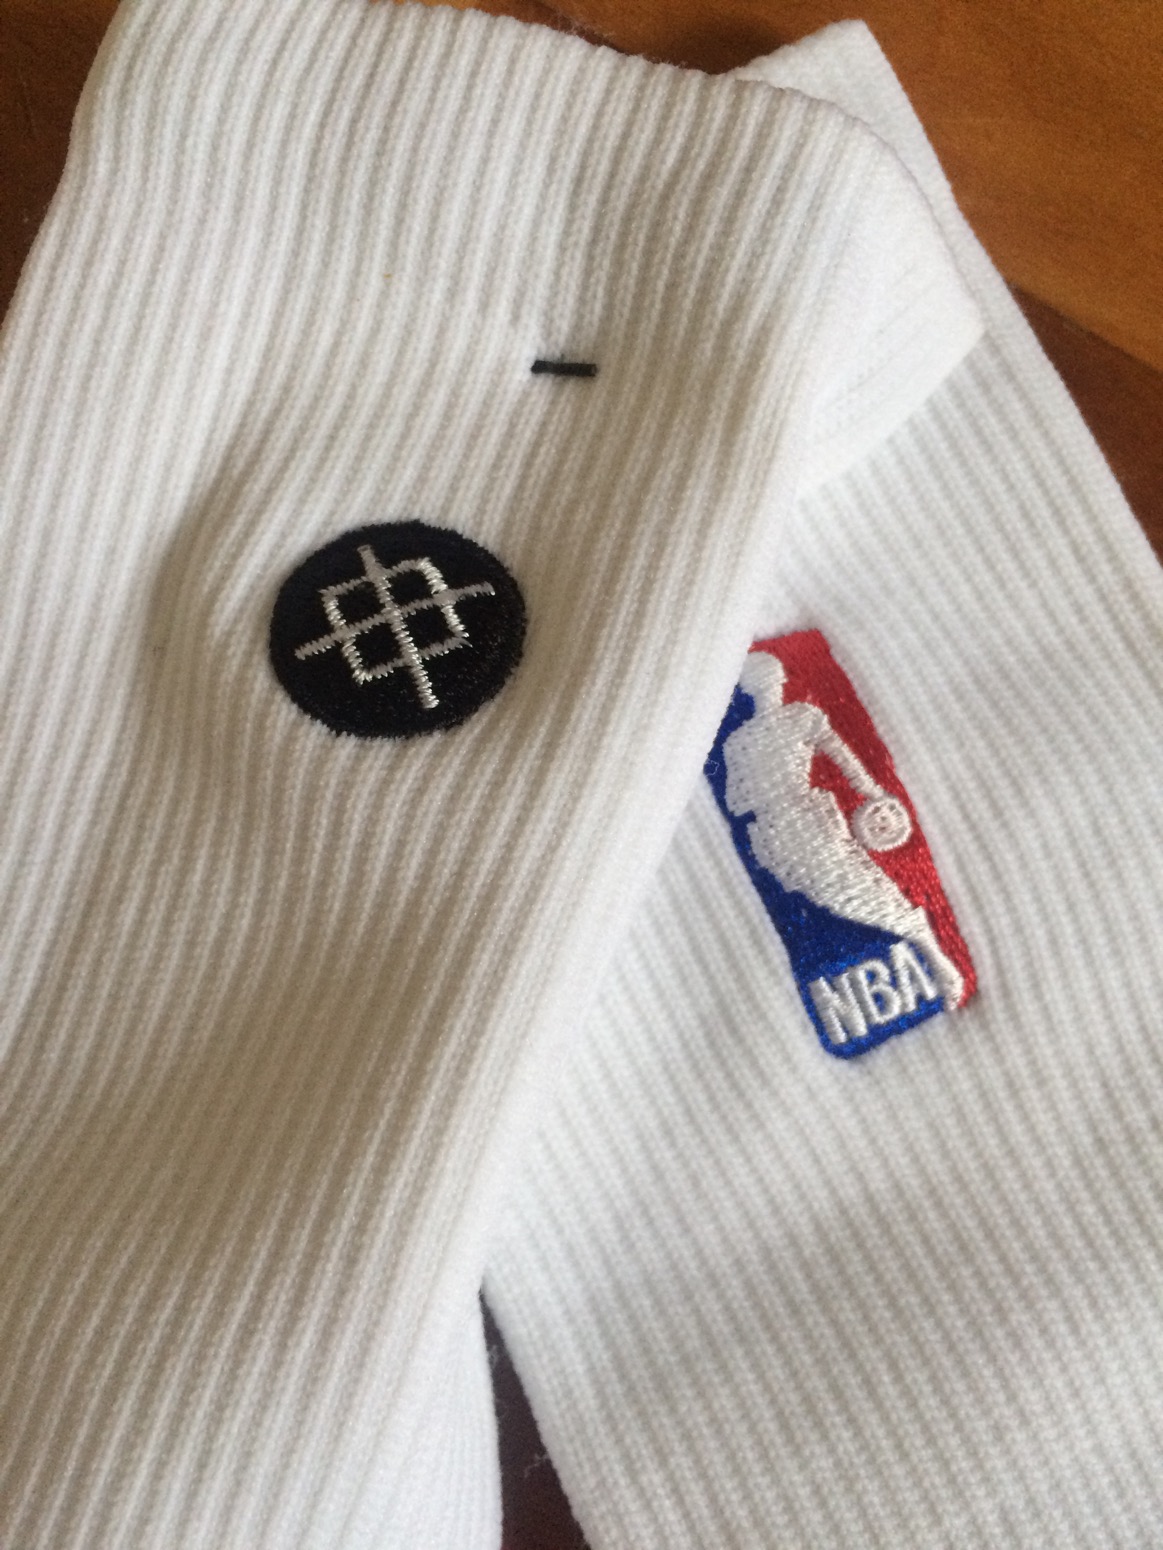 First Look: Official NBA Logo Socks by Stance | schwollo.com